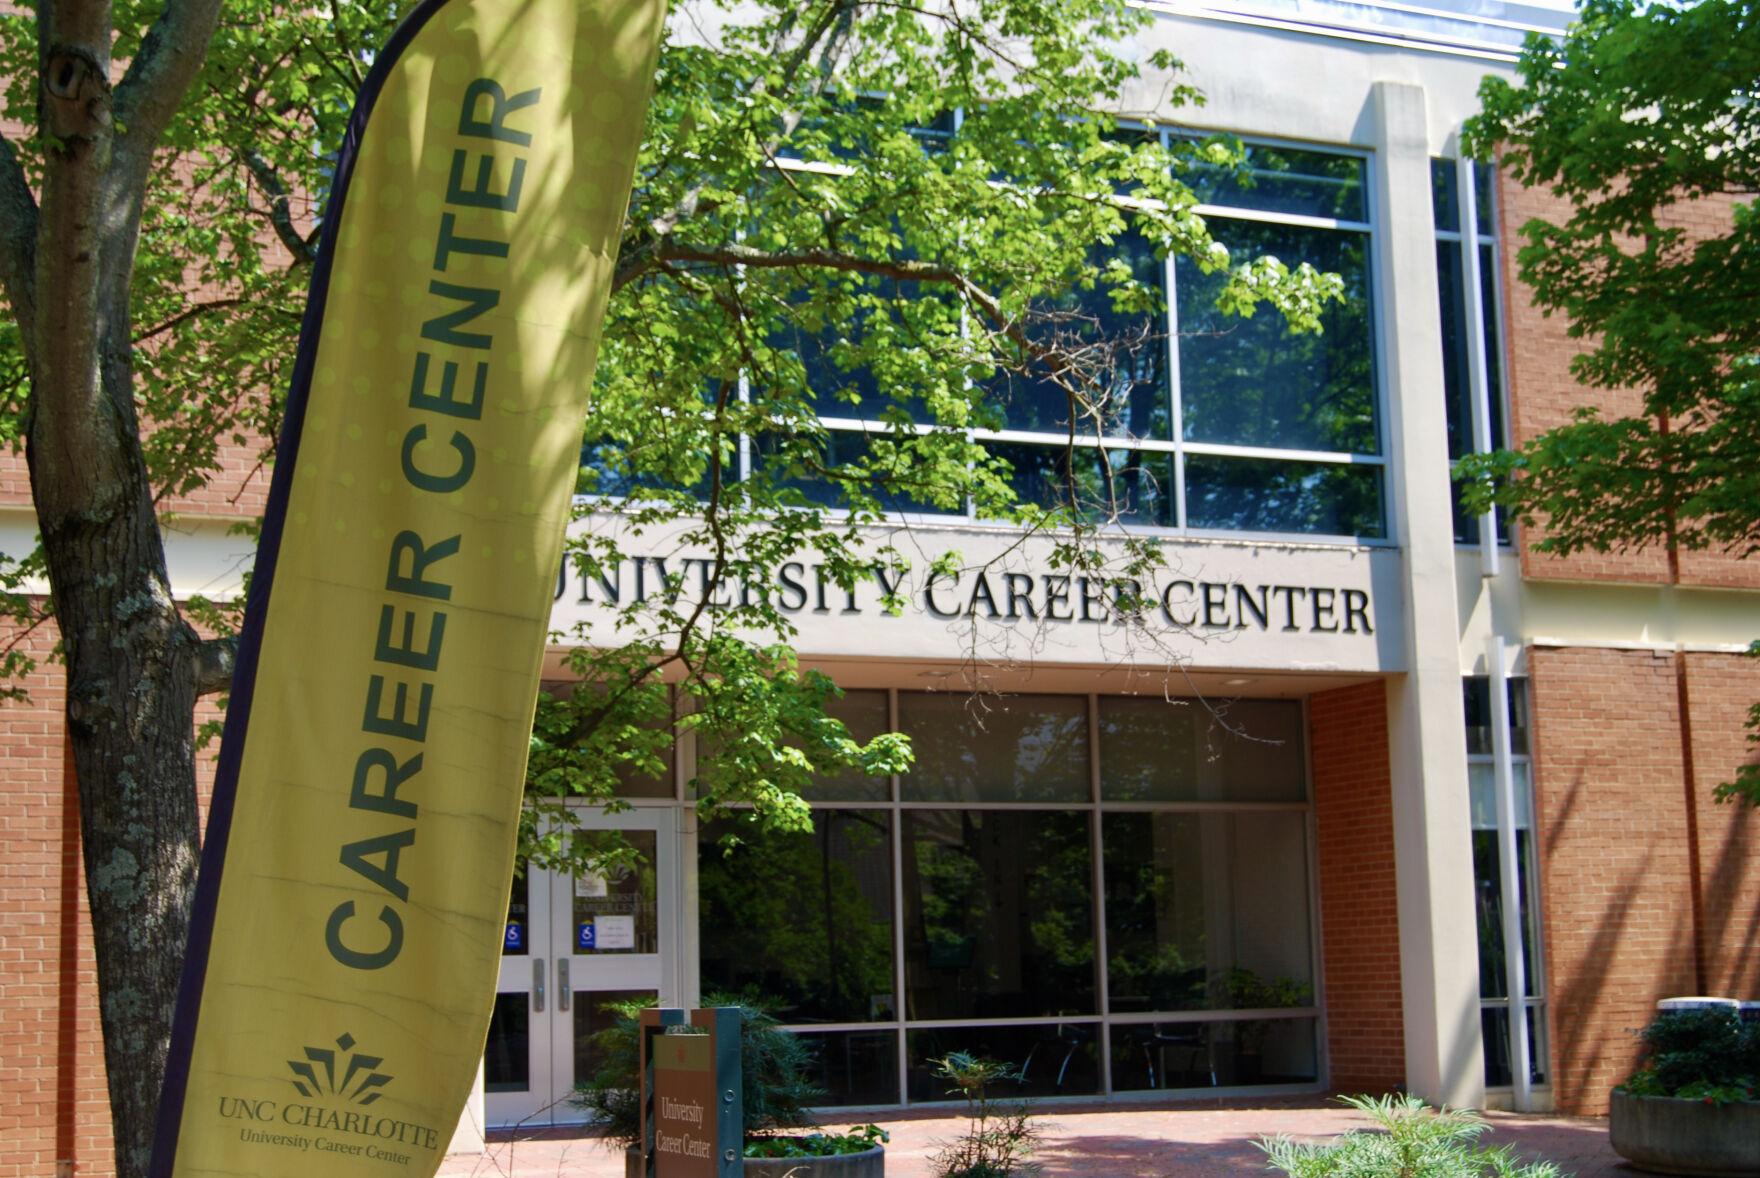 UNC Charlotte’s implication of career meet ups as a studentbased